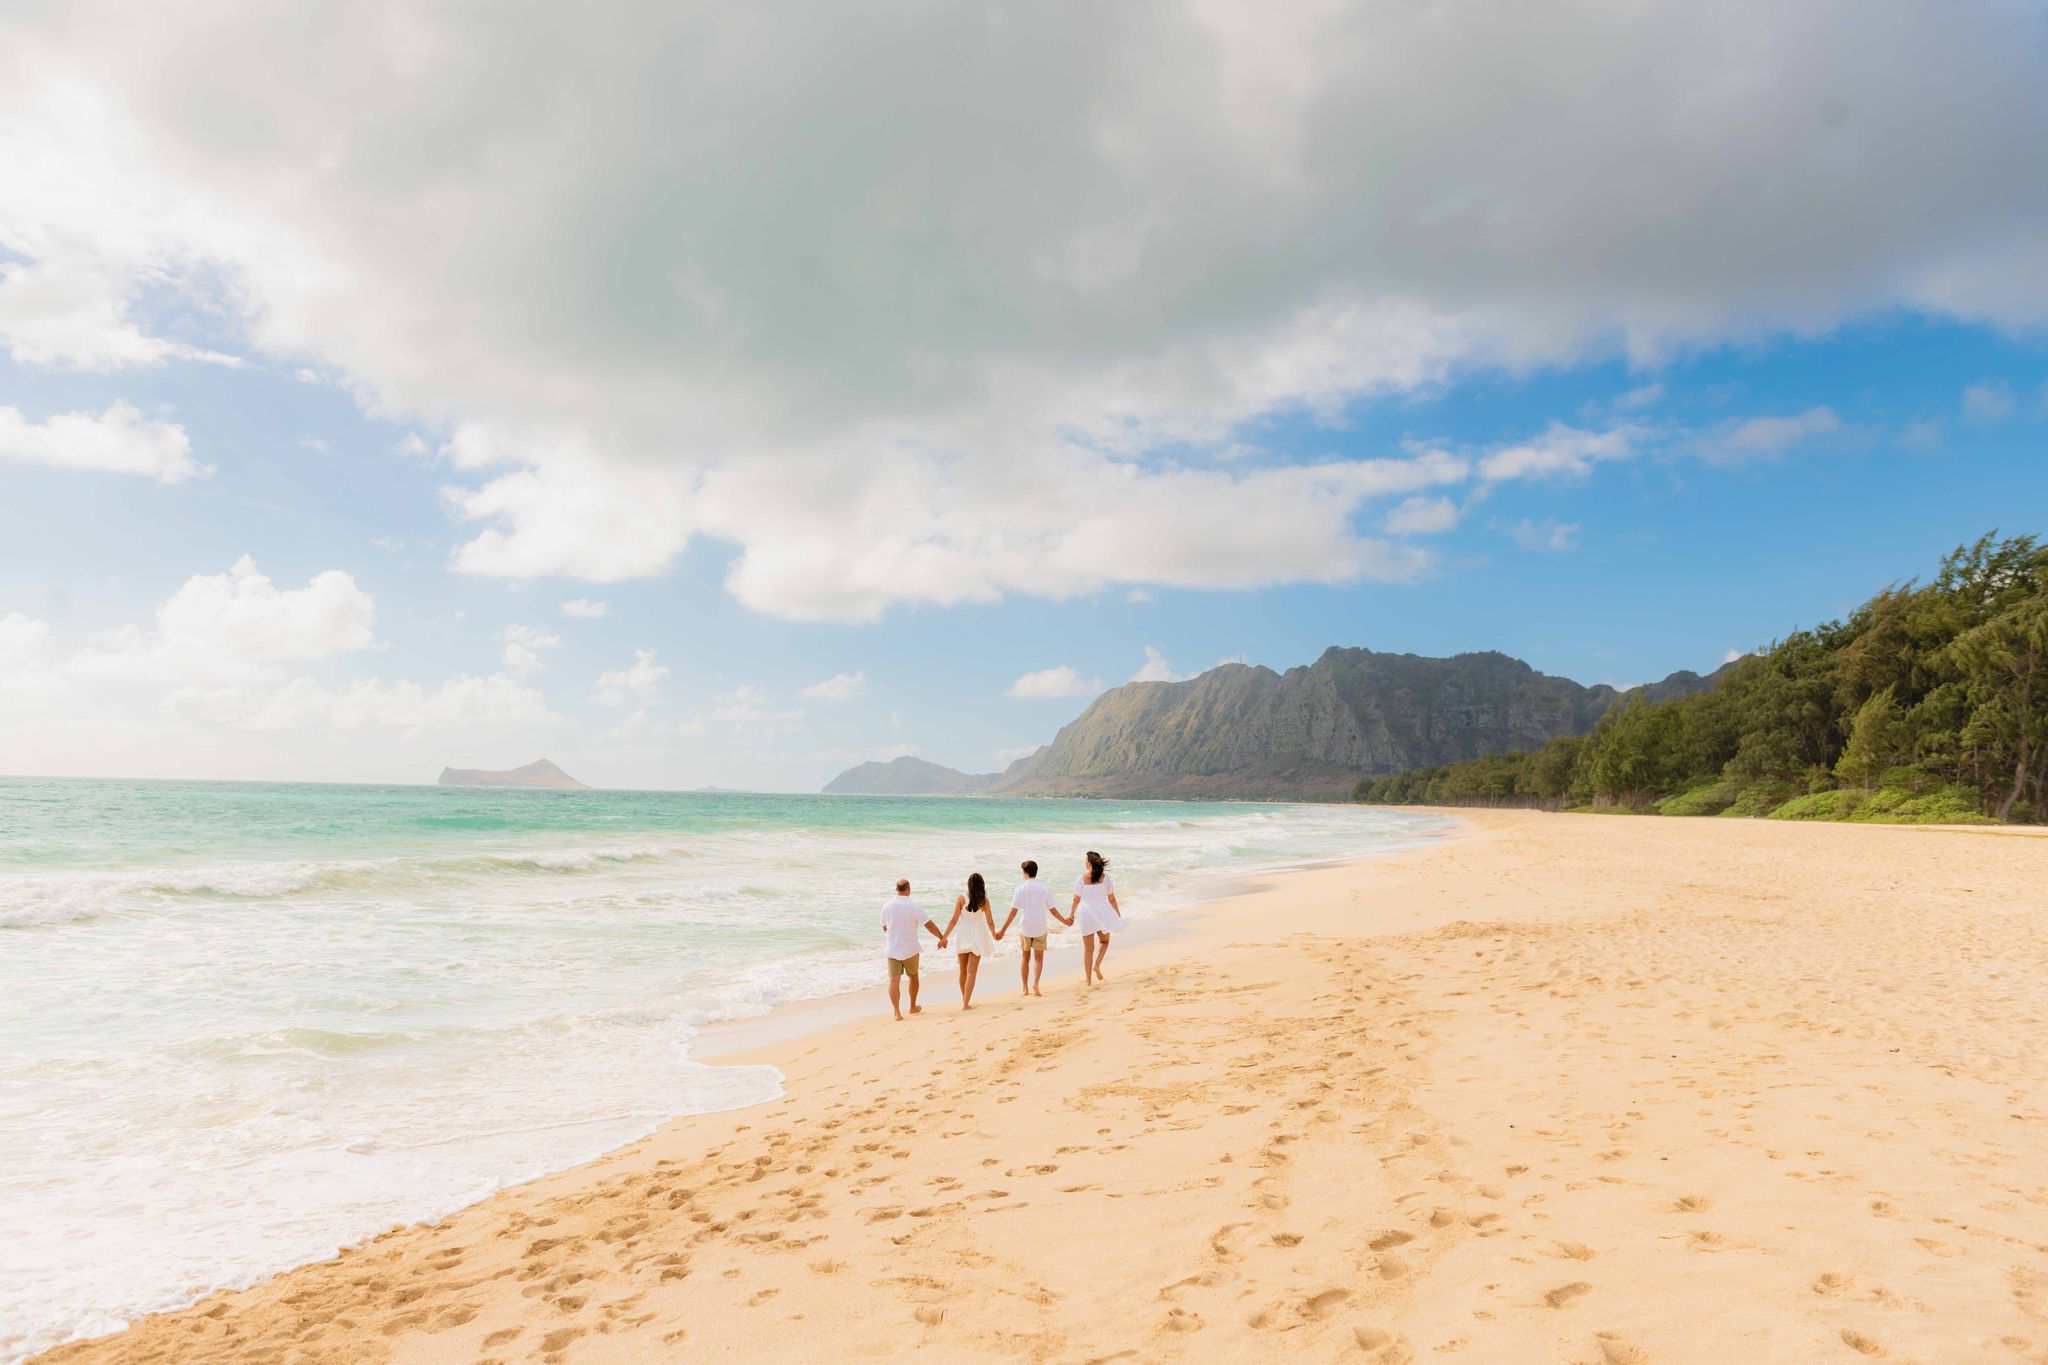 An image of 4 friends on the beach holding hands captured by oahu hawaii photographers